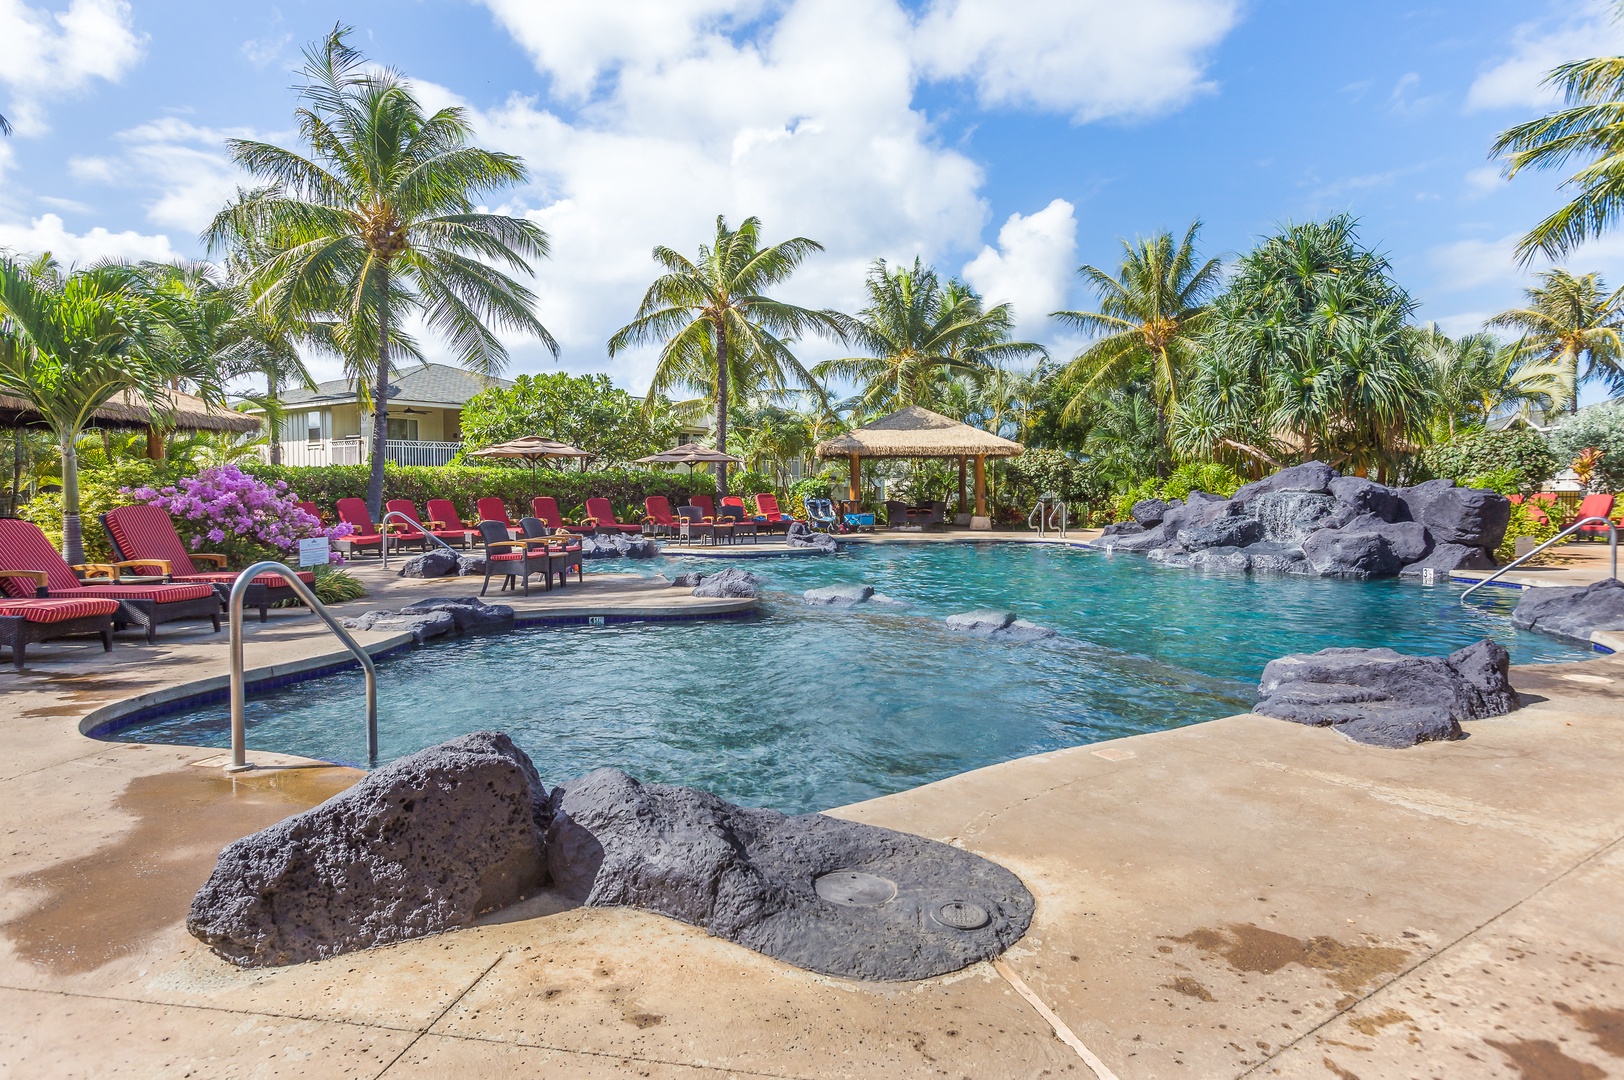 Kapolei Vacation Rentals, Ko Olina Kai Estate #20 - Go for a swim in the crystal blue waters at the pool.